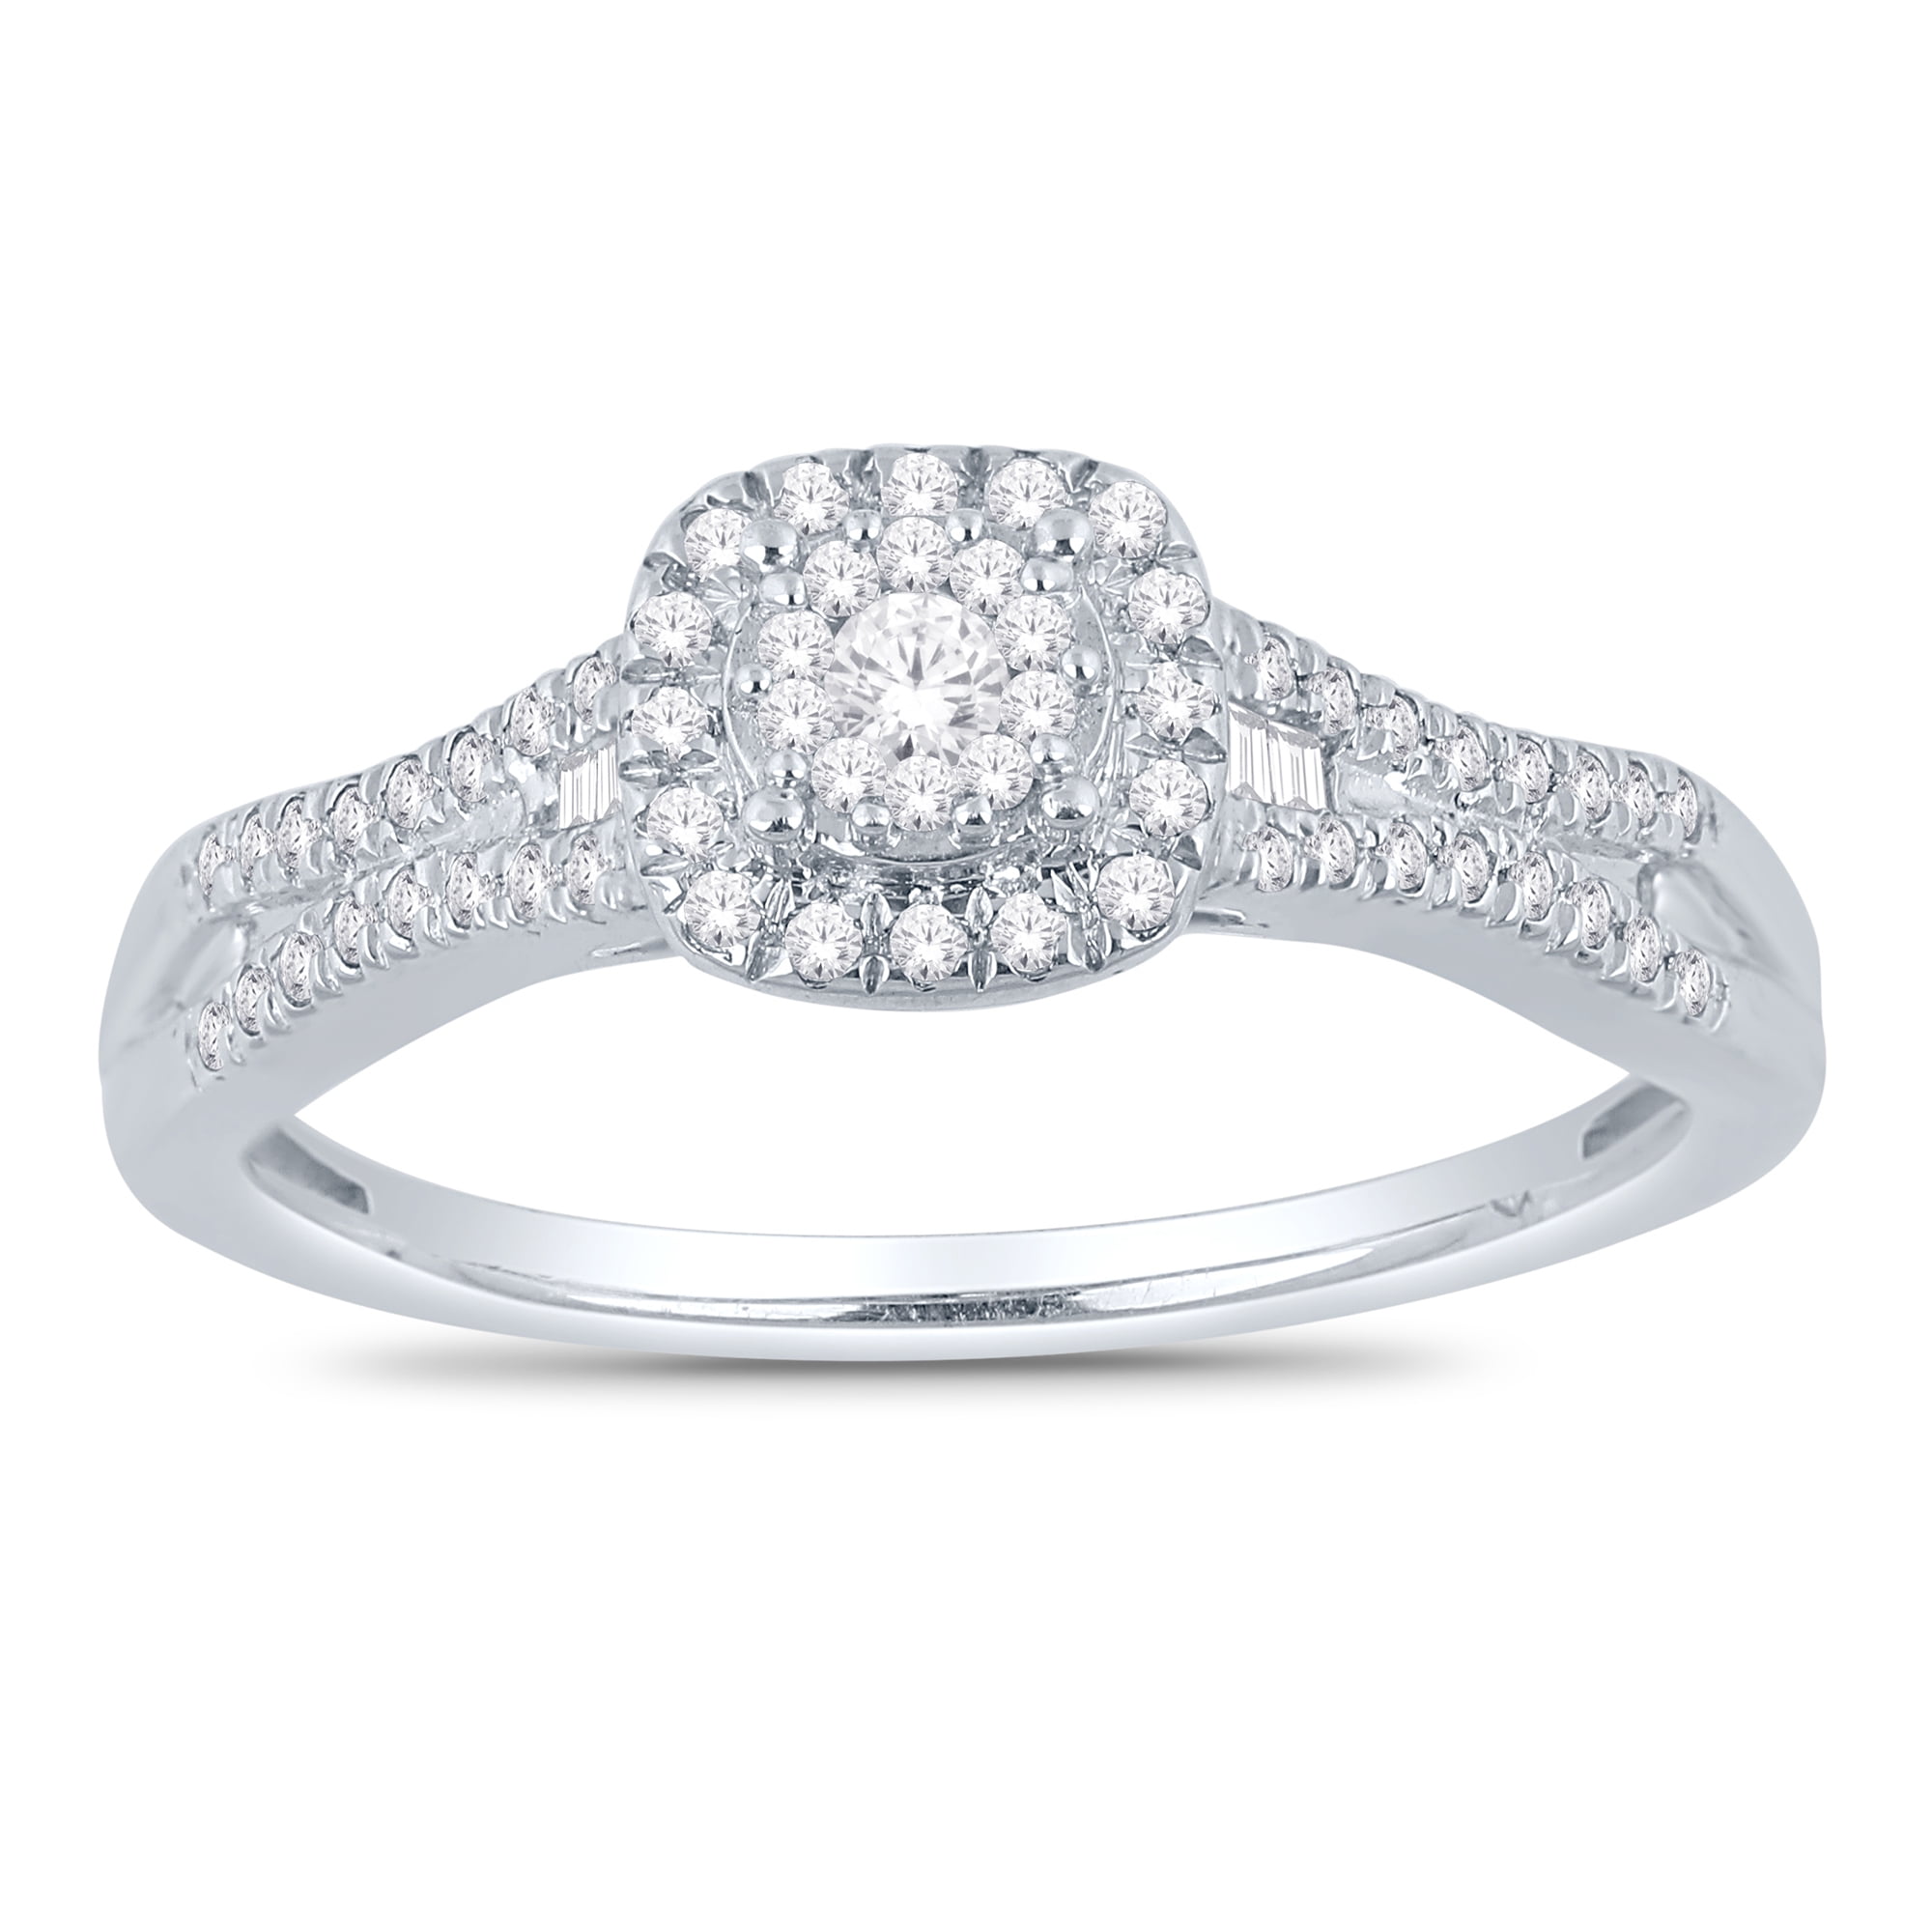 Cushion Frame Diamond Promise Ring With 1/3 Carat TW Of Diamonds In ...